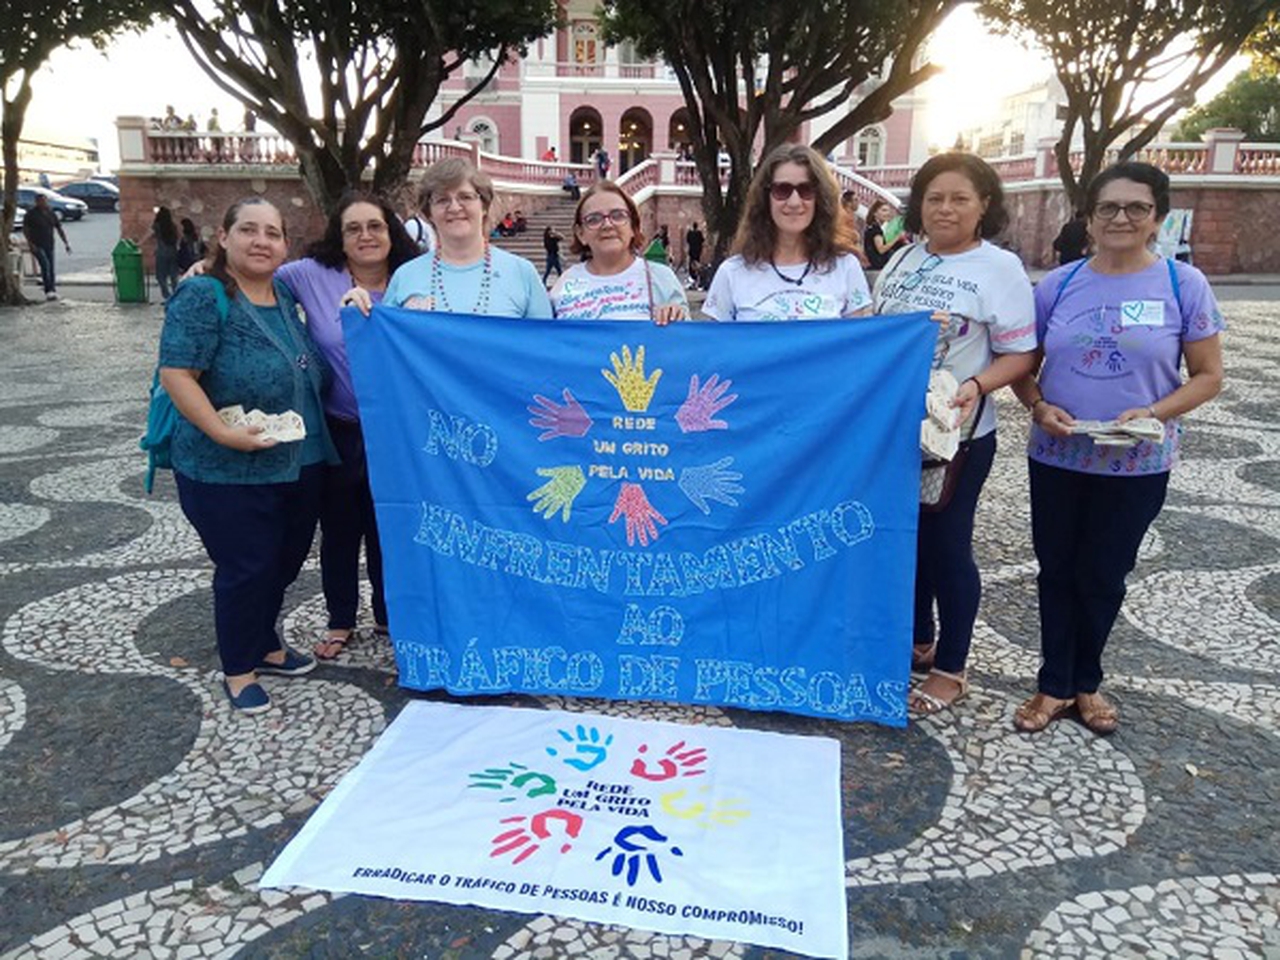 The Semana Coração Azul (Week of the Blue Heart) calls upon Amazon society to reflect on Trafficking in Persons